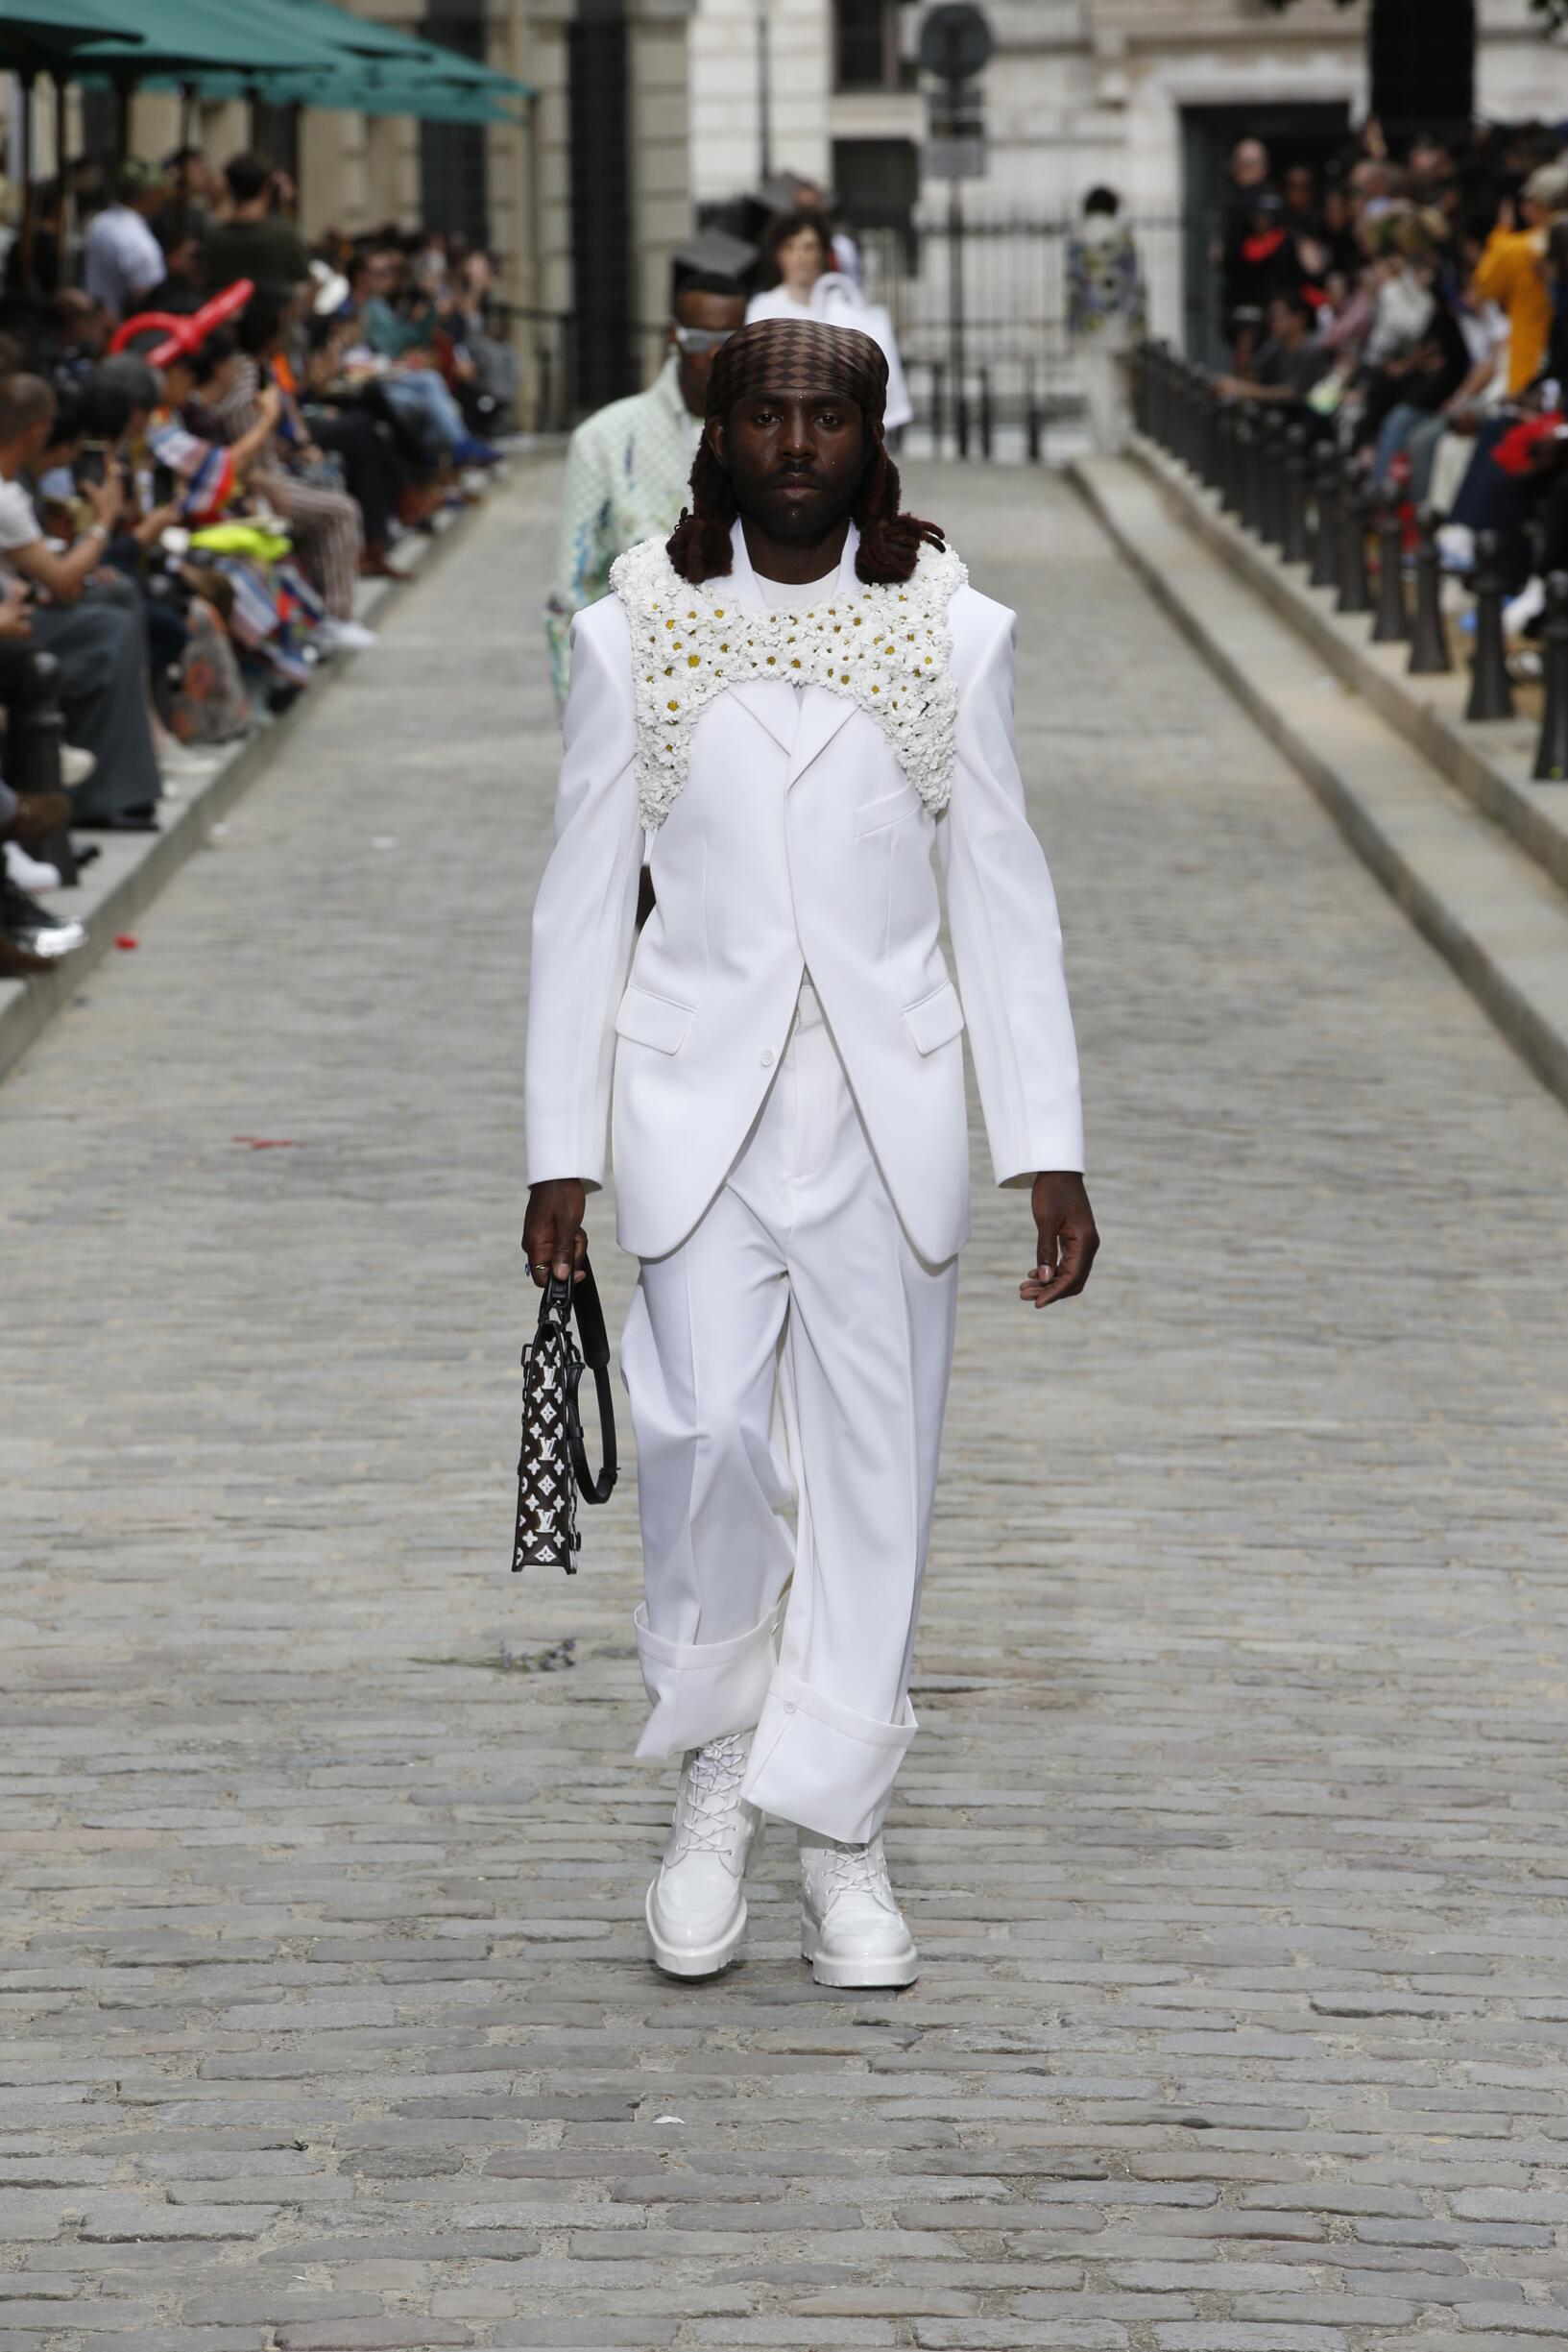 LOUIS VUITTON SPRING SUMMER 2020 MEN’S COLLECTION | The Skinny Beep